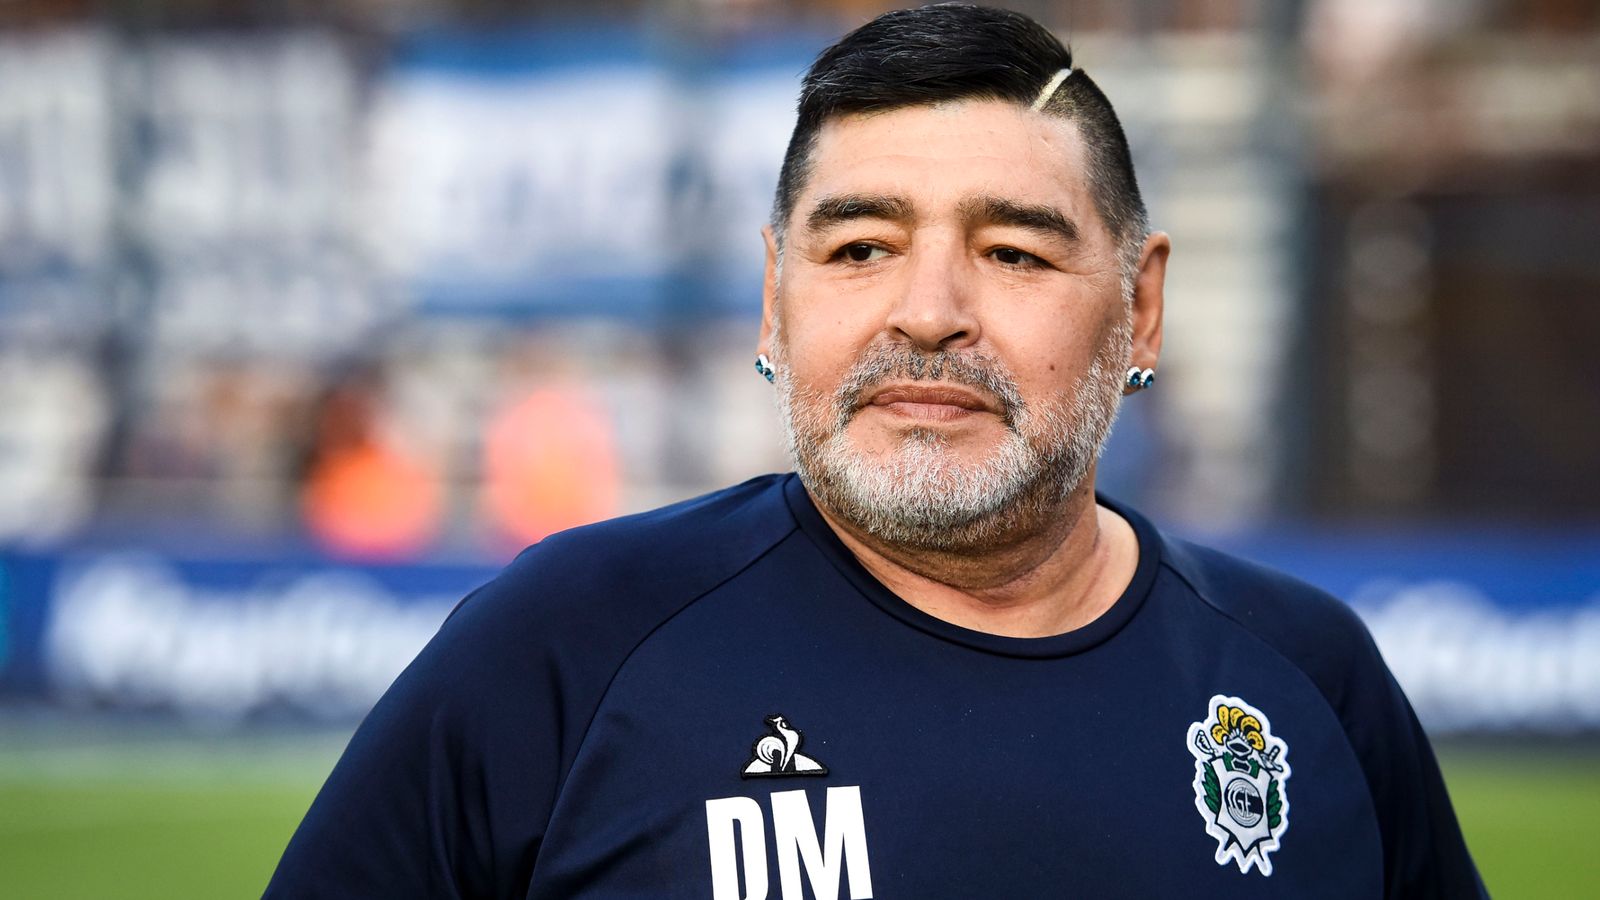 diego-maradona-argentina-legend-out-of-hospital-after-brain-surgery